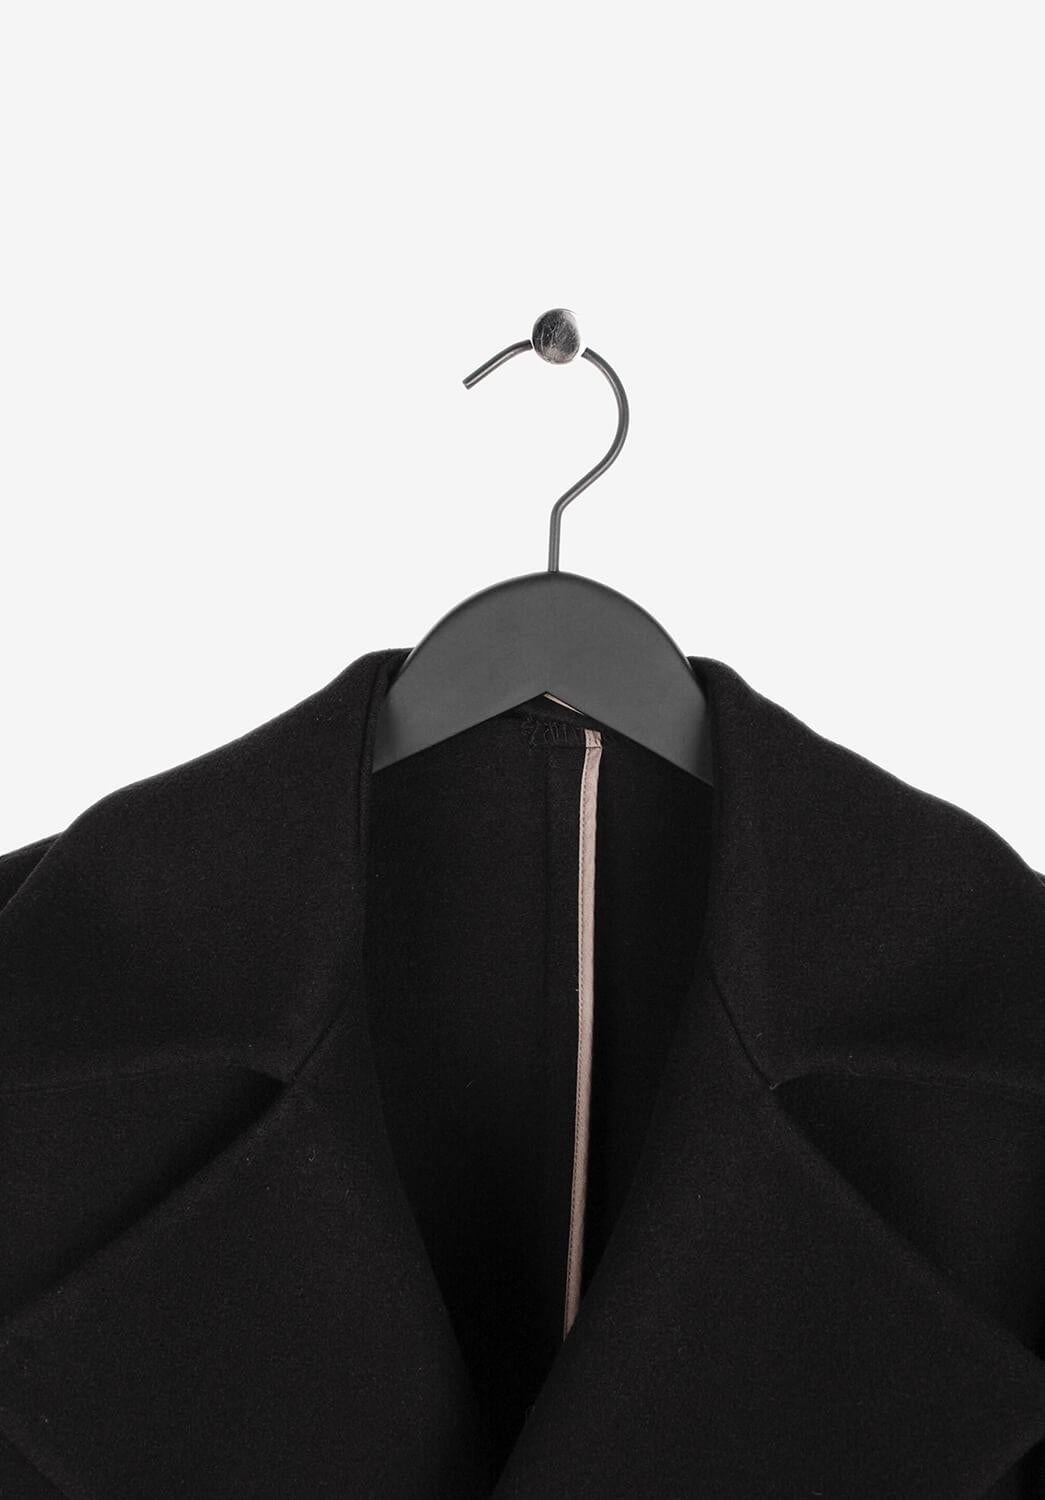 Item for sale is 100% genuine Berluti Wool Peacoat
Color: Black
(An actual color may a bit vary due to individual computer screen interpretation)
Material: 100% wool
Tag size: 52R (runs Medium/Slim L)
This jacket is great quality item. Rate 9 of 10,